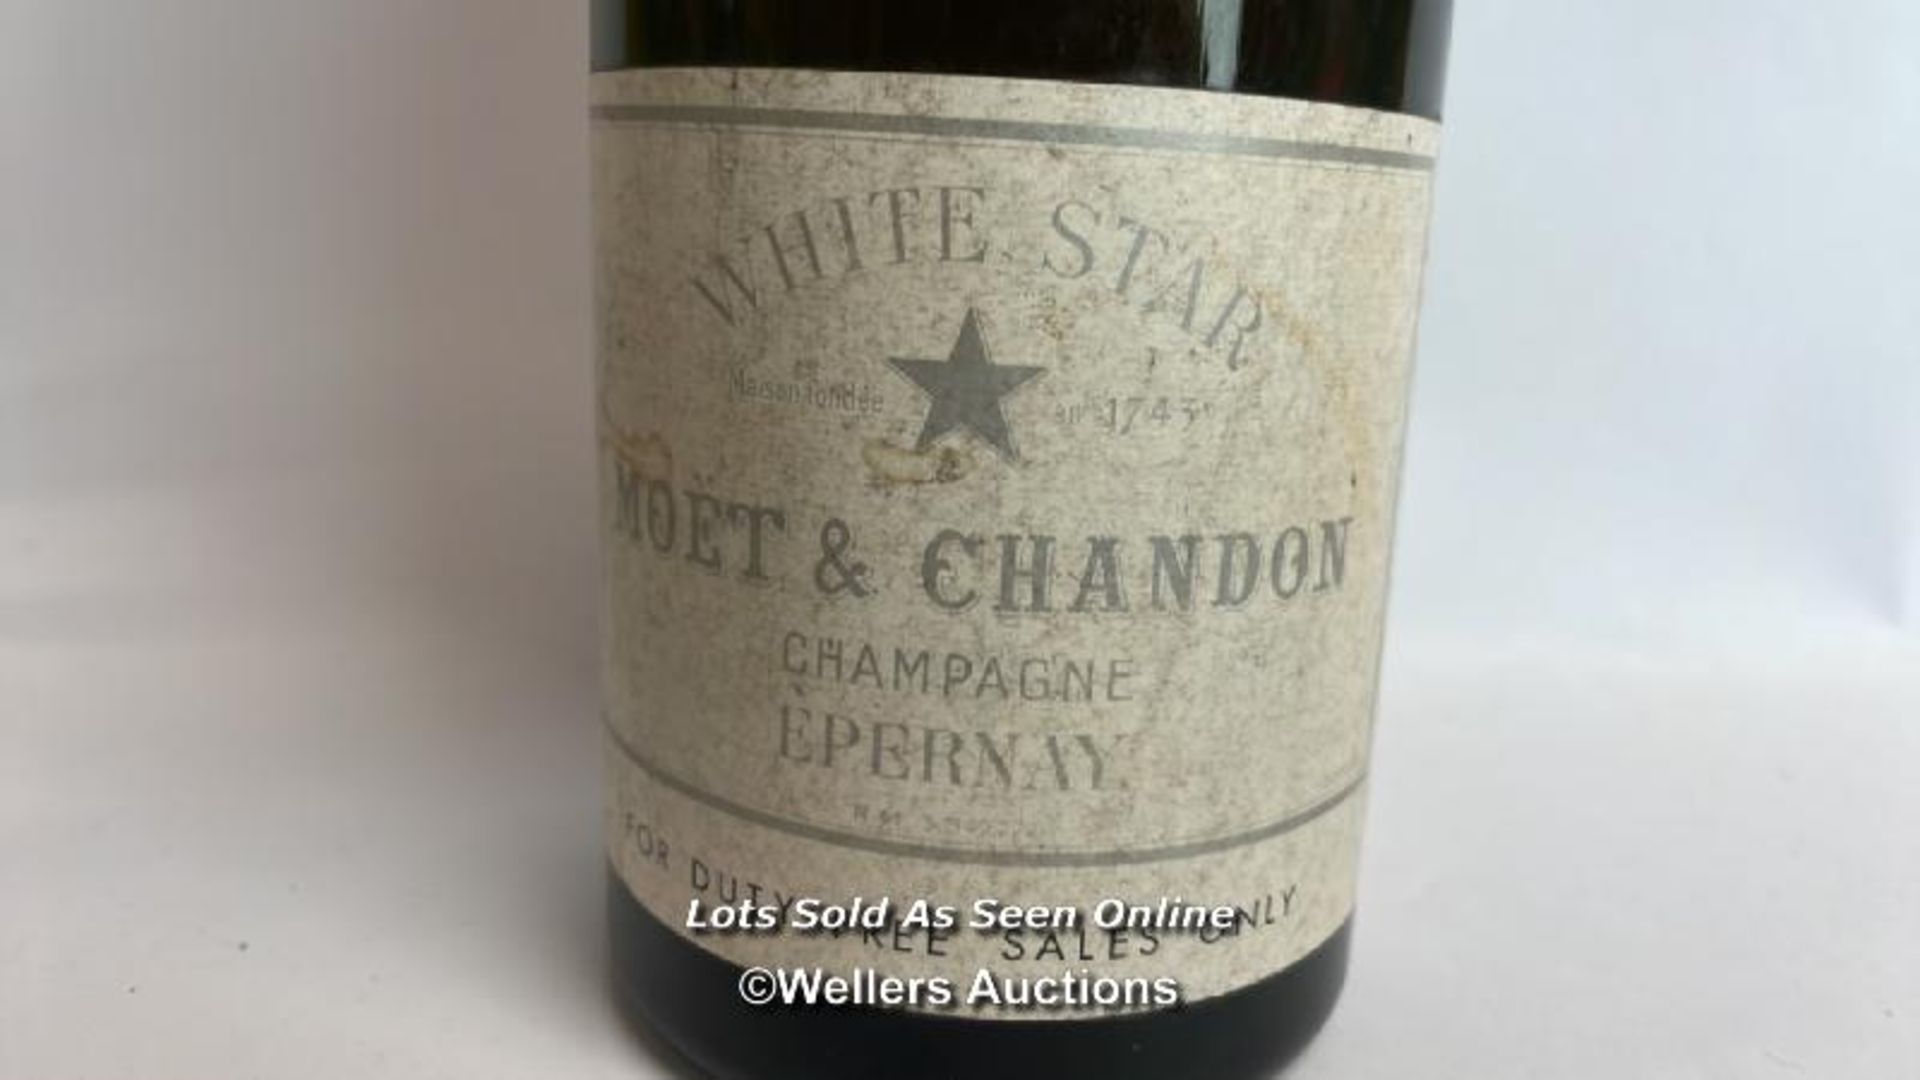 White Star Moet & Chandon Champagne Epernay, 75cl, NM3342272 / Please see images for fill level - Bild 2 aus 7